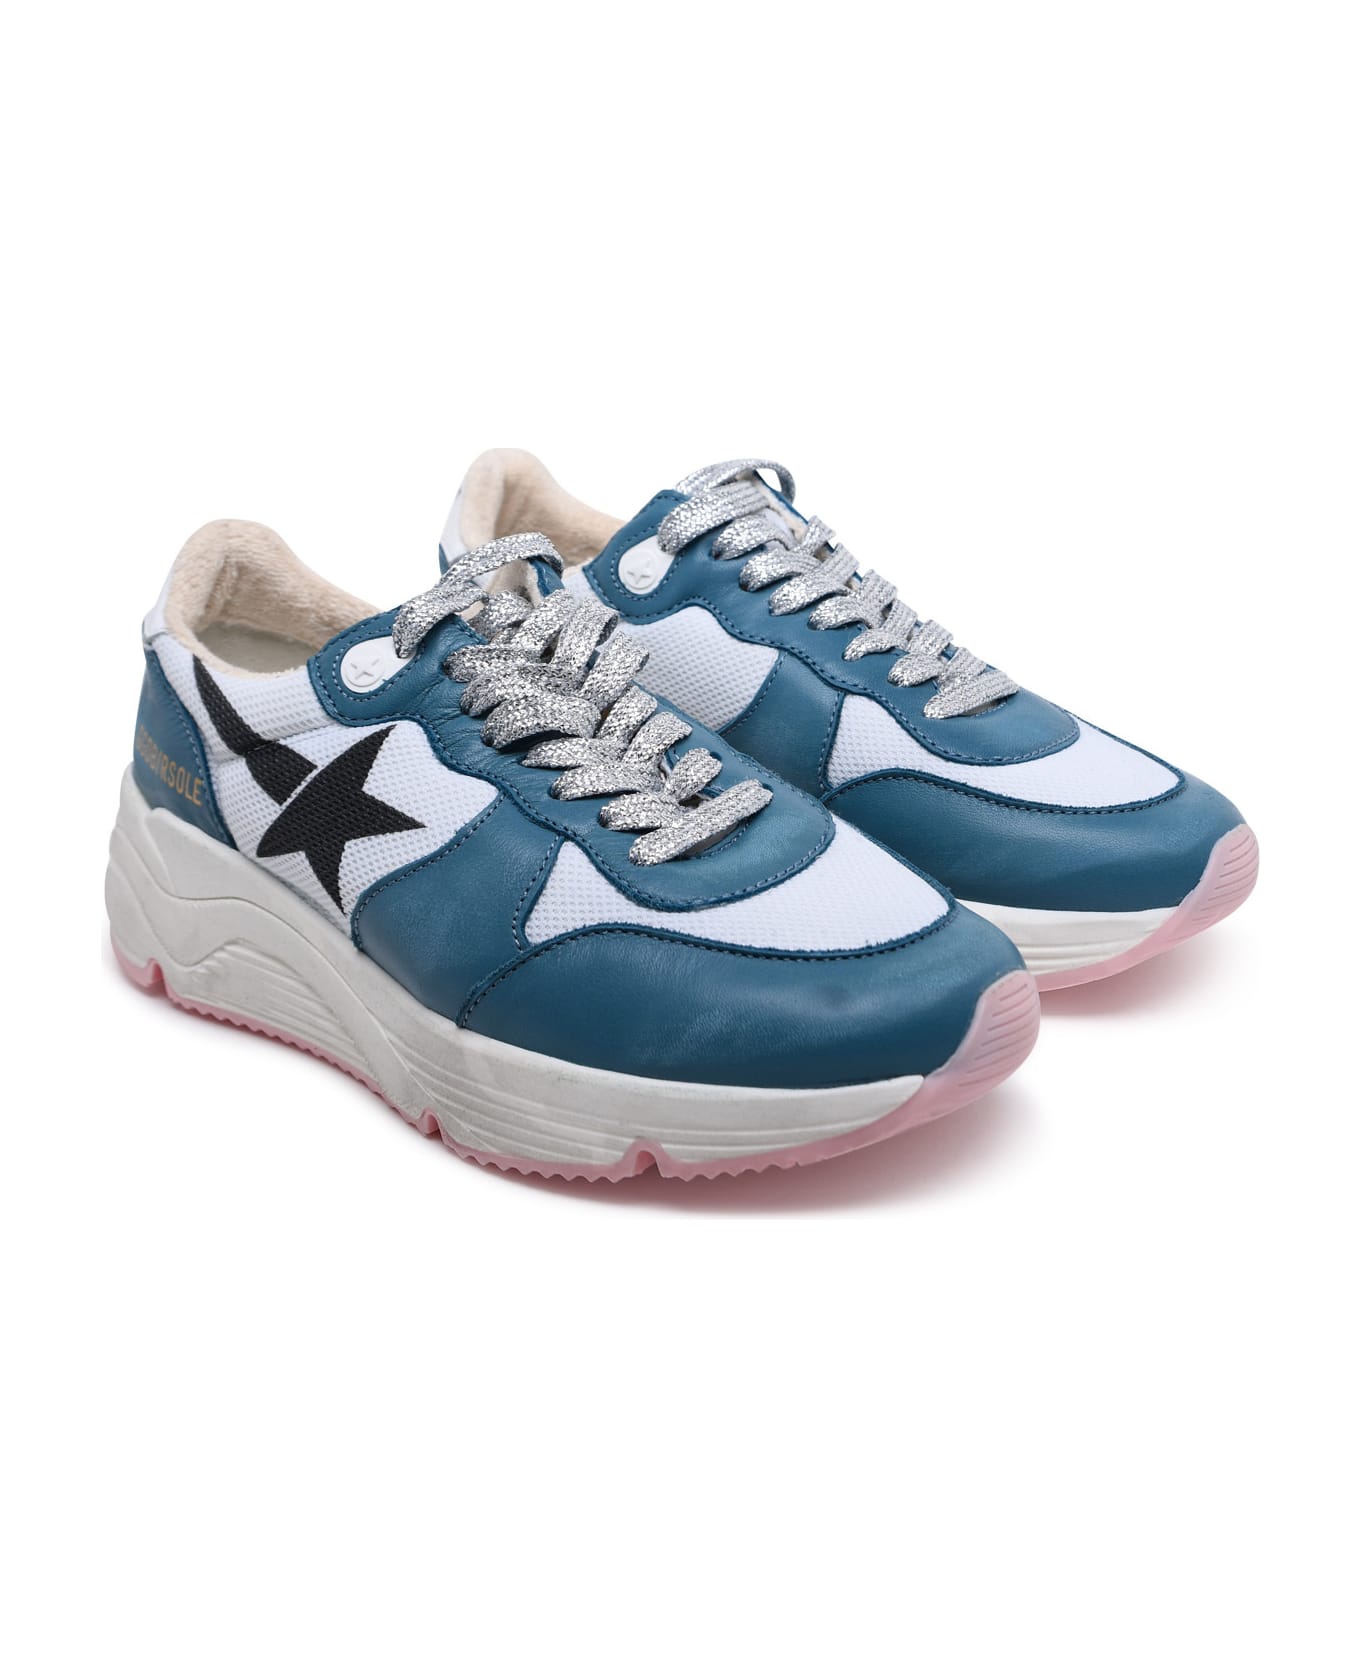 Golden Goose Running Sole Two-color Leather Blend Sneakers - turquoise スニーカー